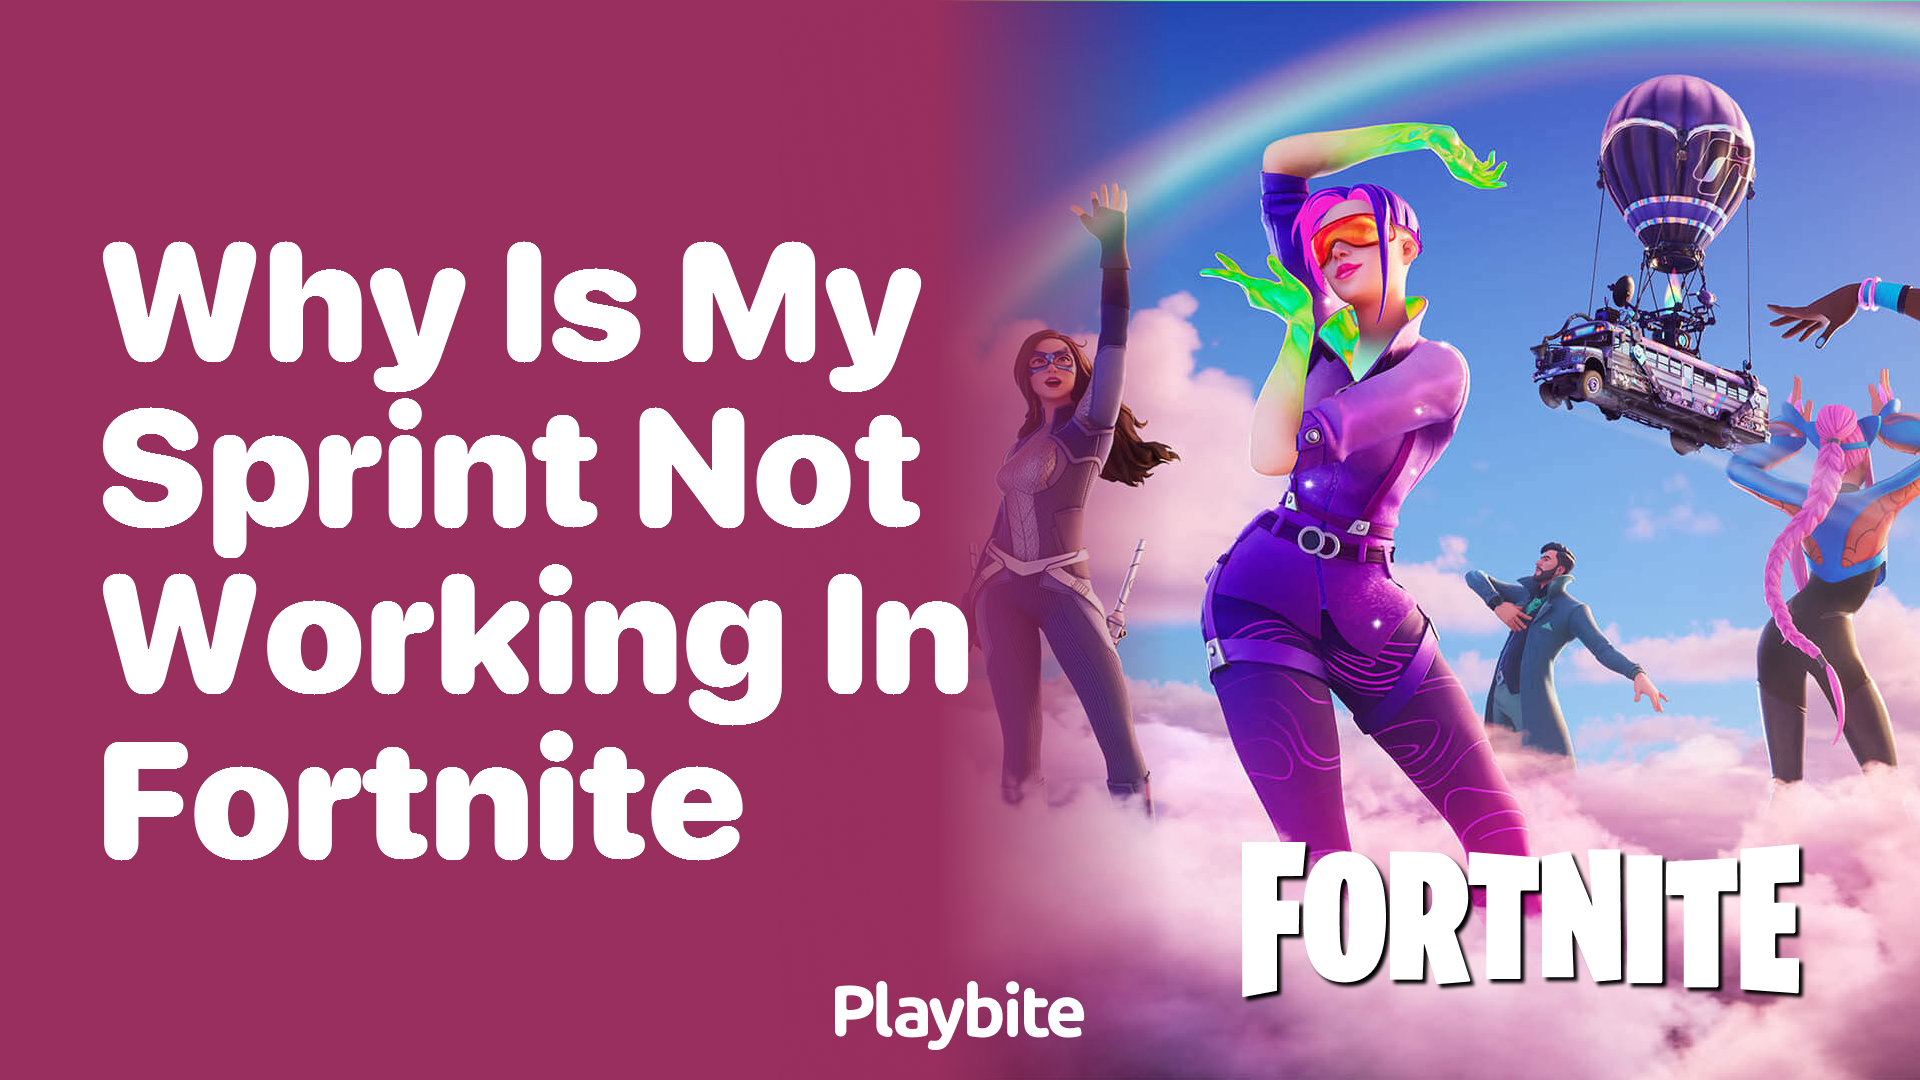 Why Is My Sprint Not Working in Fortnite?